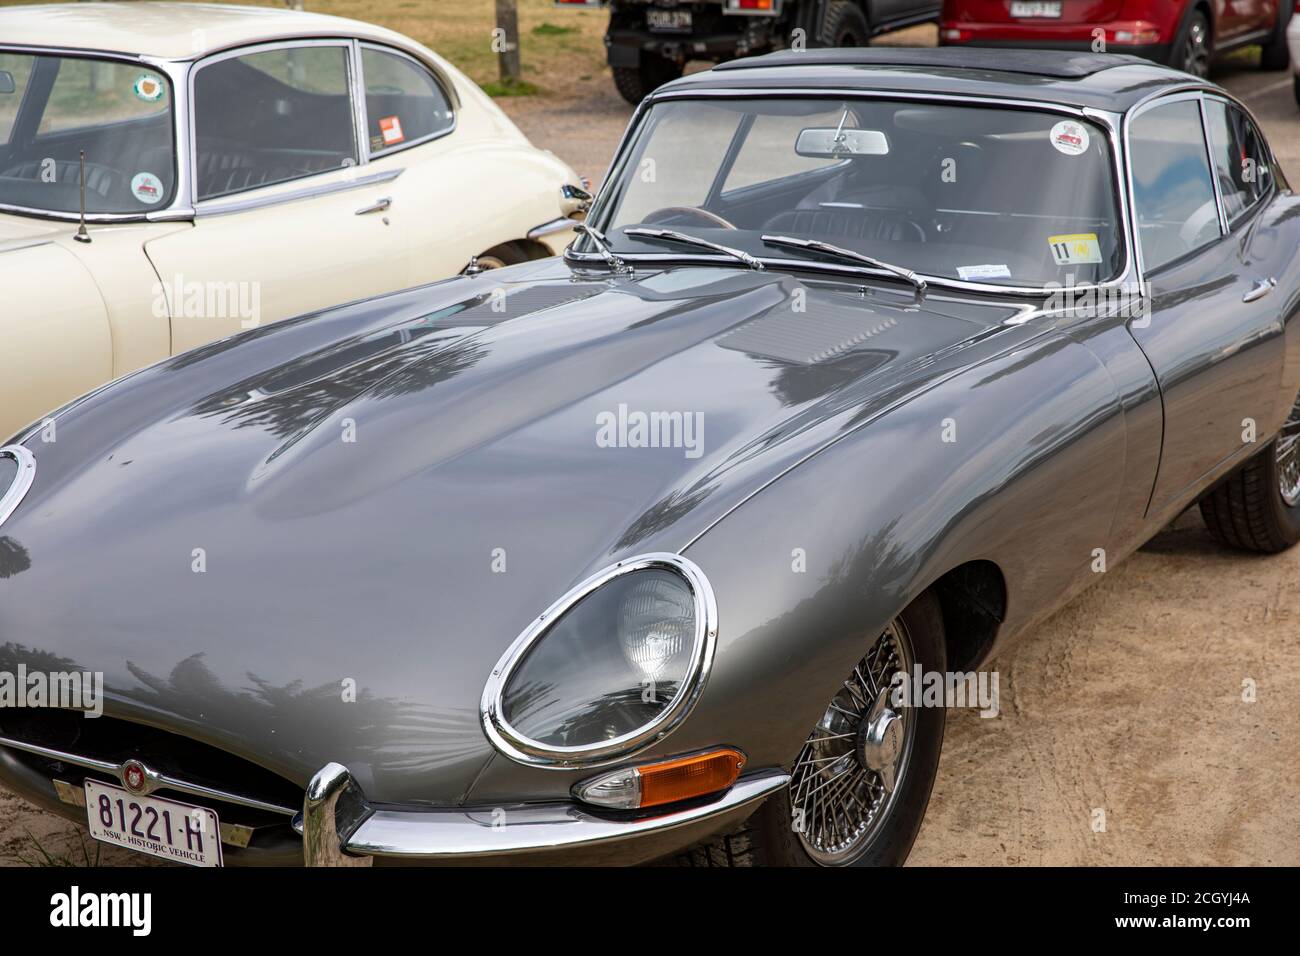 Two E type jaguars classic cars parked in Palm beach,Sydney,Australia Stock Photo